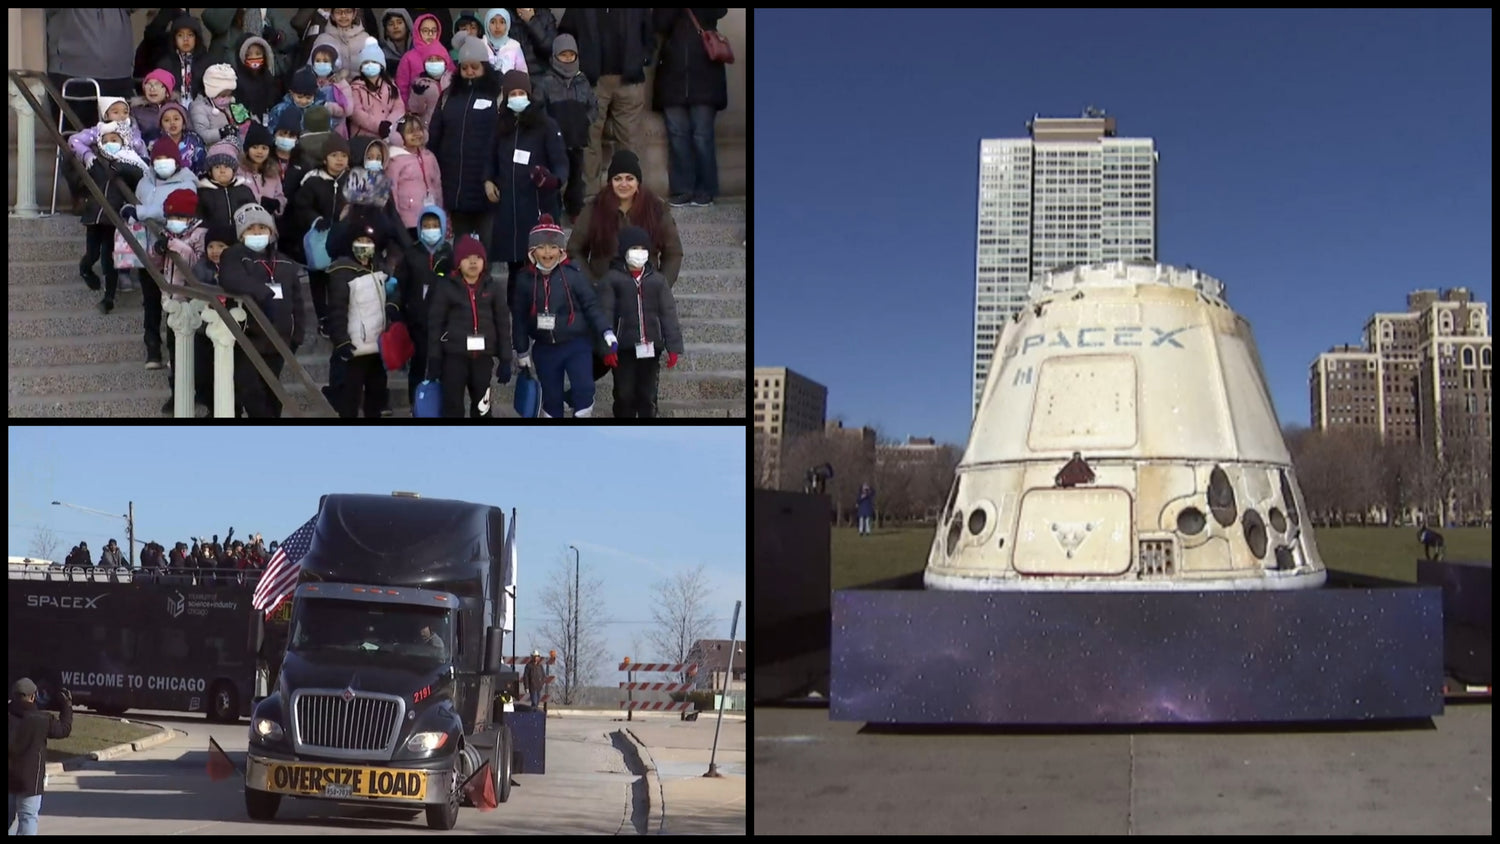 SpaceX donates a Dragon spacecraft to The Chicago Museum of Science and Industry